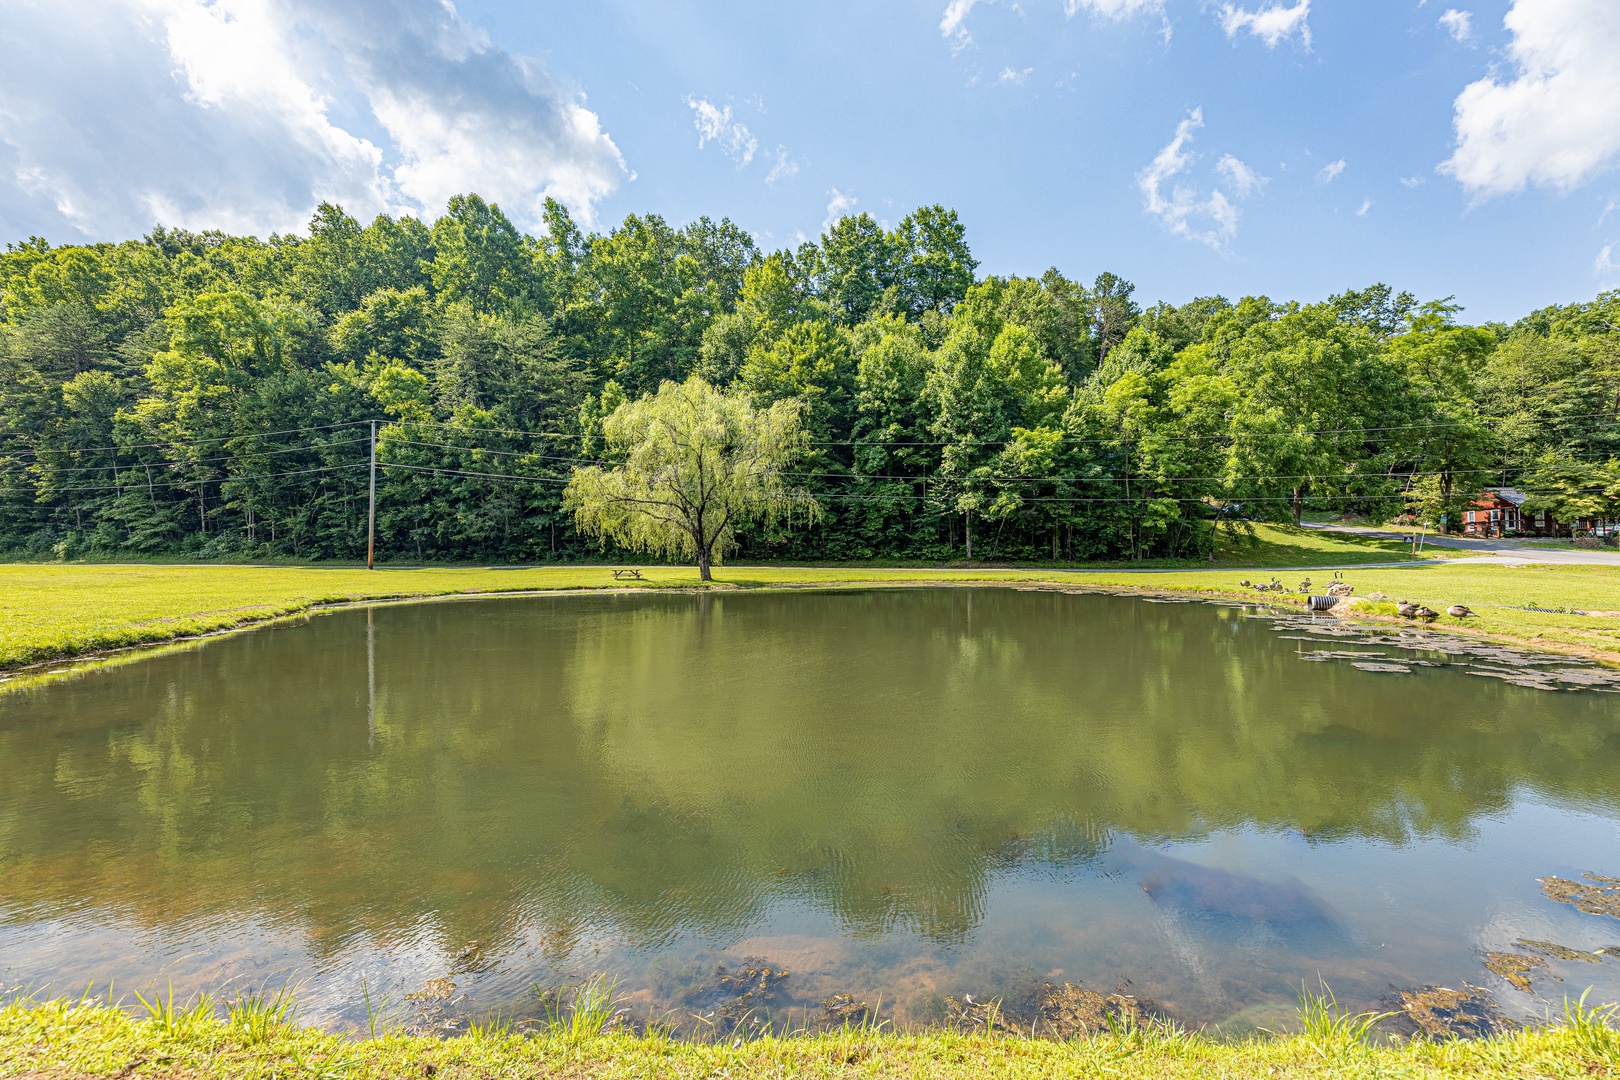 Sky Harbor Pond at A Bear on the Ridge, a 2 bedroom cabin rental located in Pigeon Forge